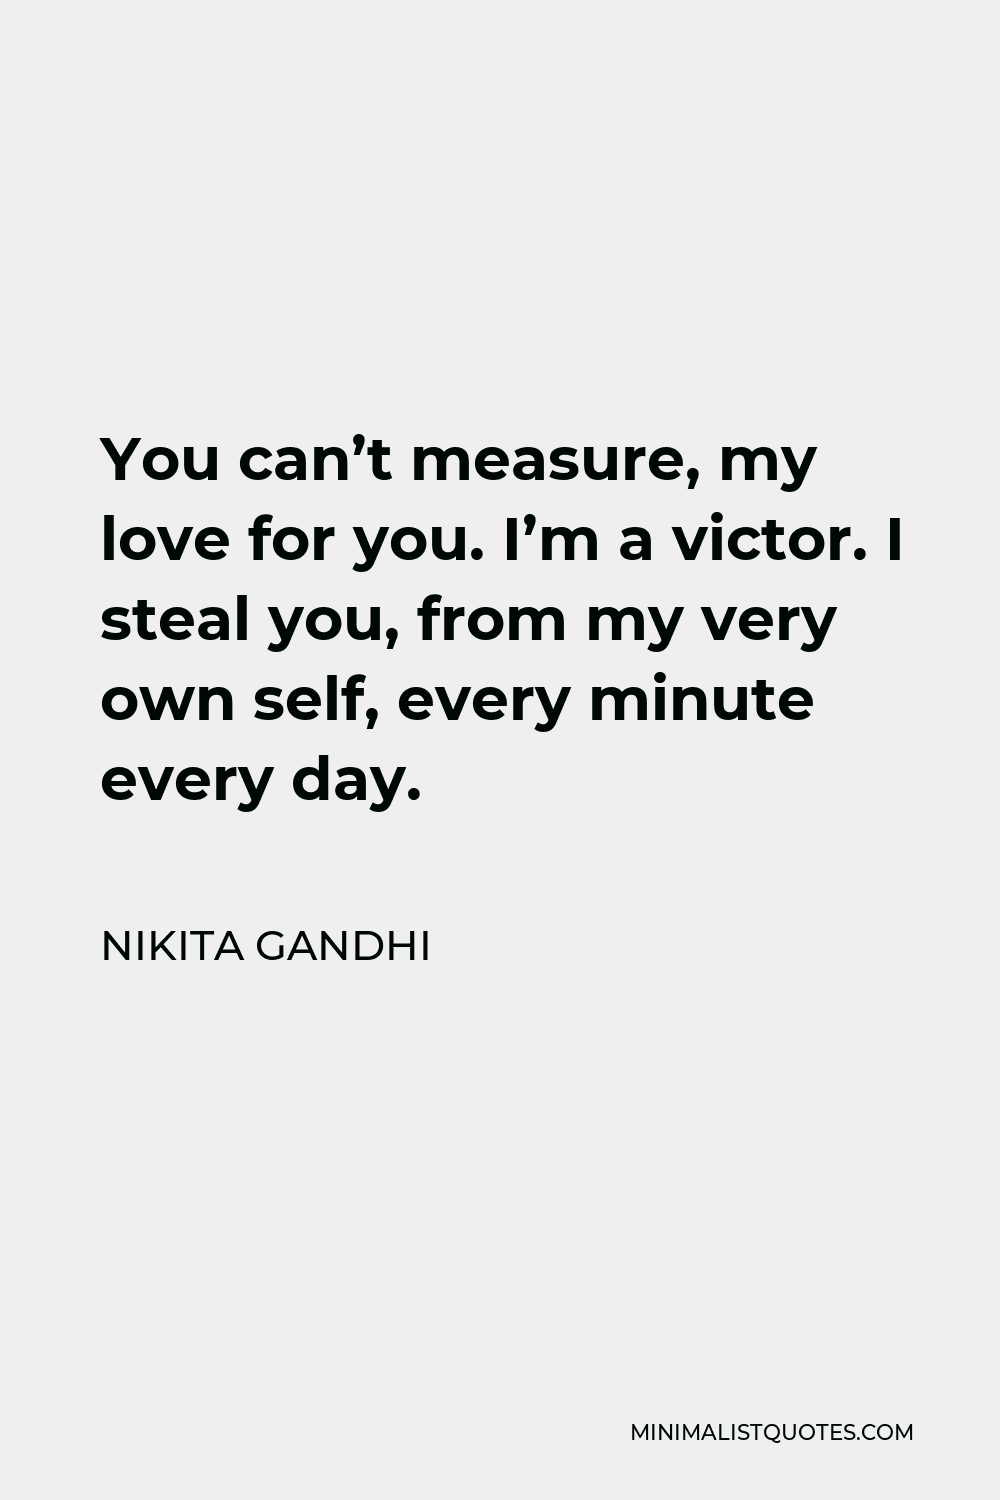 Nikita Gandhi Quote - You can’t measure, my love for you. I’m a victor. I steal you, from my very own self, every minute every day.